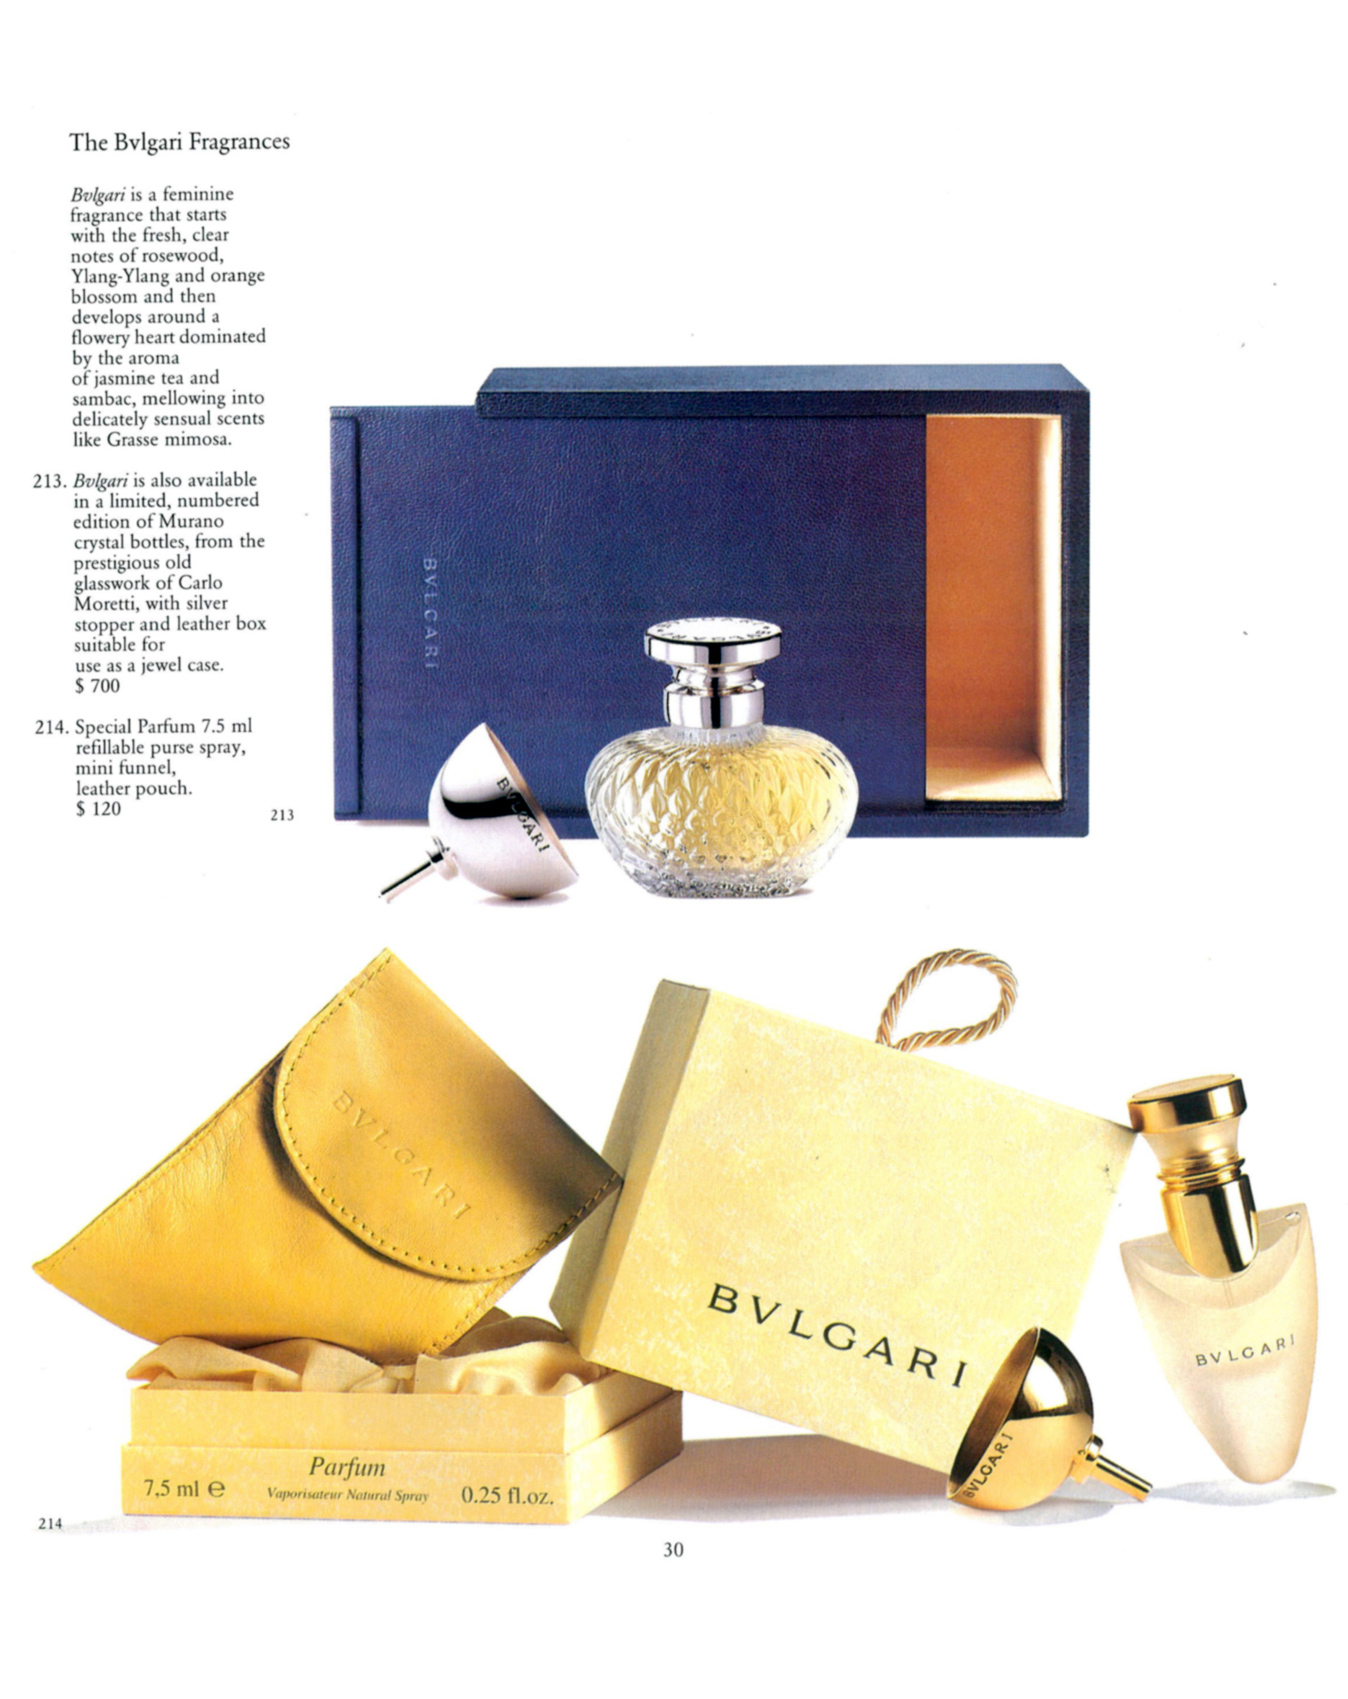 Advertisement Ad Page Catalog Bvlgari Bulgari Murano Italy Crystal Perfume Bottle Carlo Moretti Sterling Silver Numbered Limited Edition Leather Box